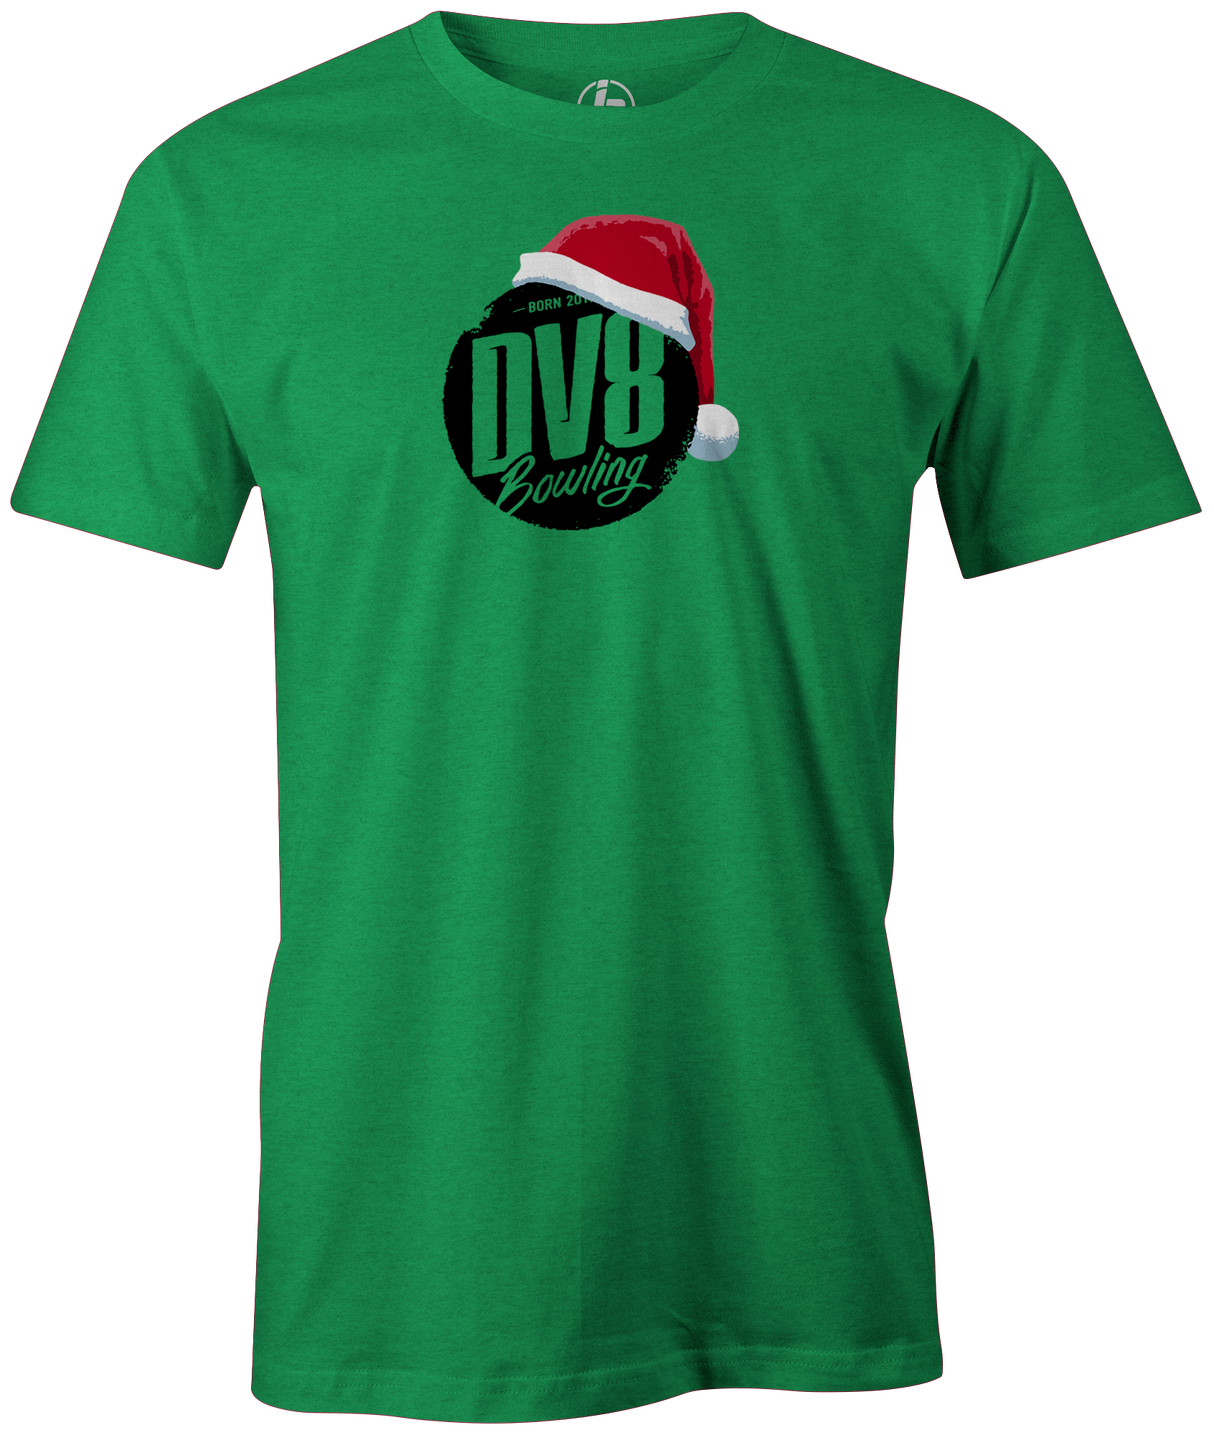 Tis' the season for Christmas bowling tee shirts. Show your Merriness on and off the lanes with the DV8 Holiday T-shirt!  ugly t-shirt comes in red and black colors. Show your holiday spirit with this shirt that helps you hook the ball at your office party or night out with your friends!  Bowling gift holiday gift guide. Tee-shirt gift. Christmas Tree